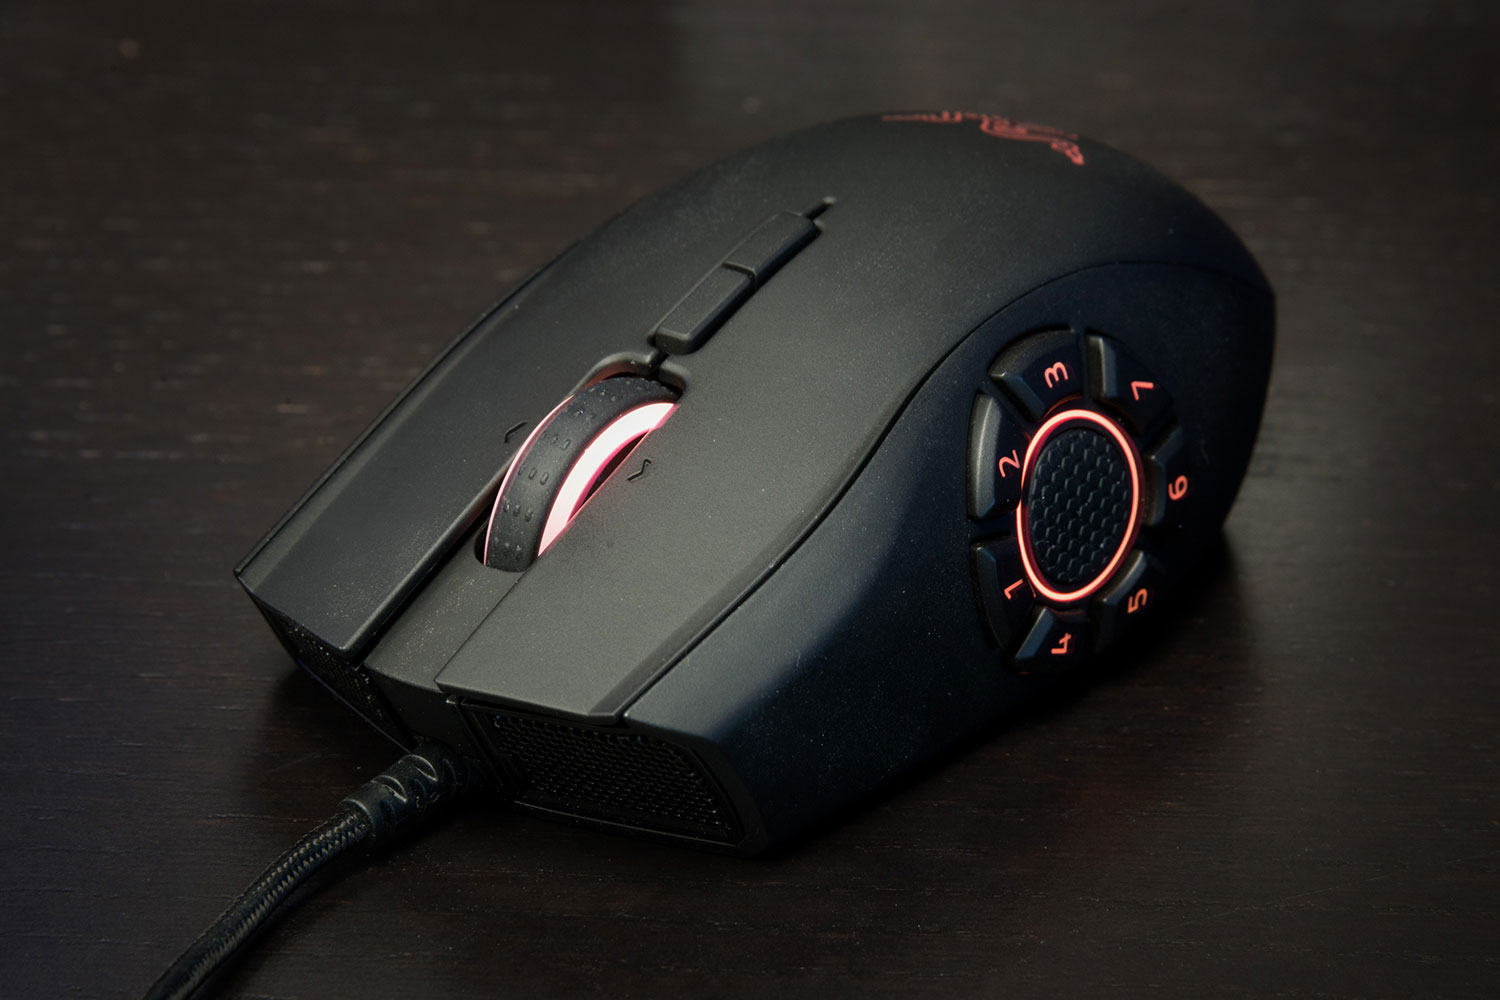 Razer introduces its most advanced mouse to date – the Razer